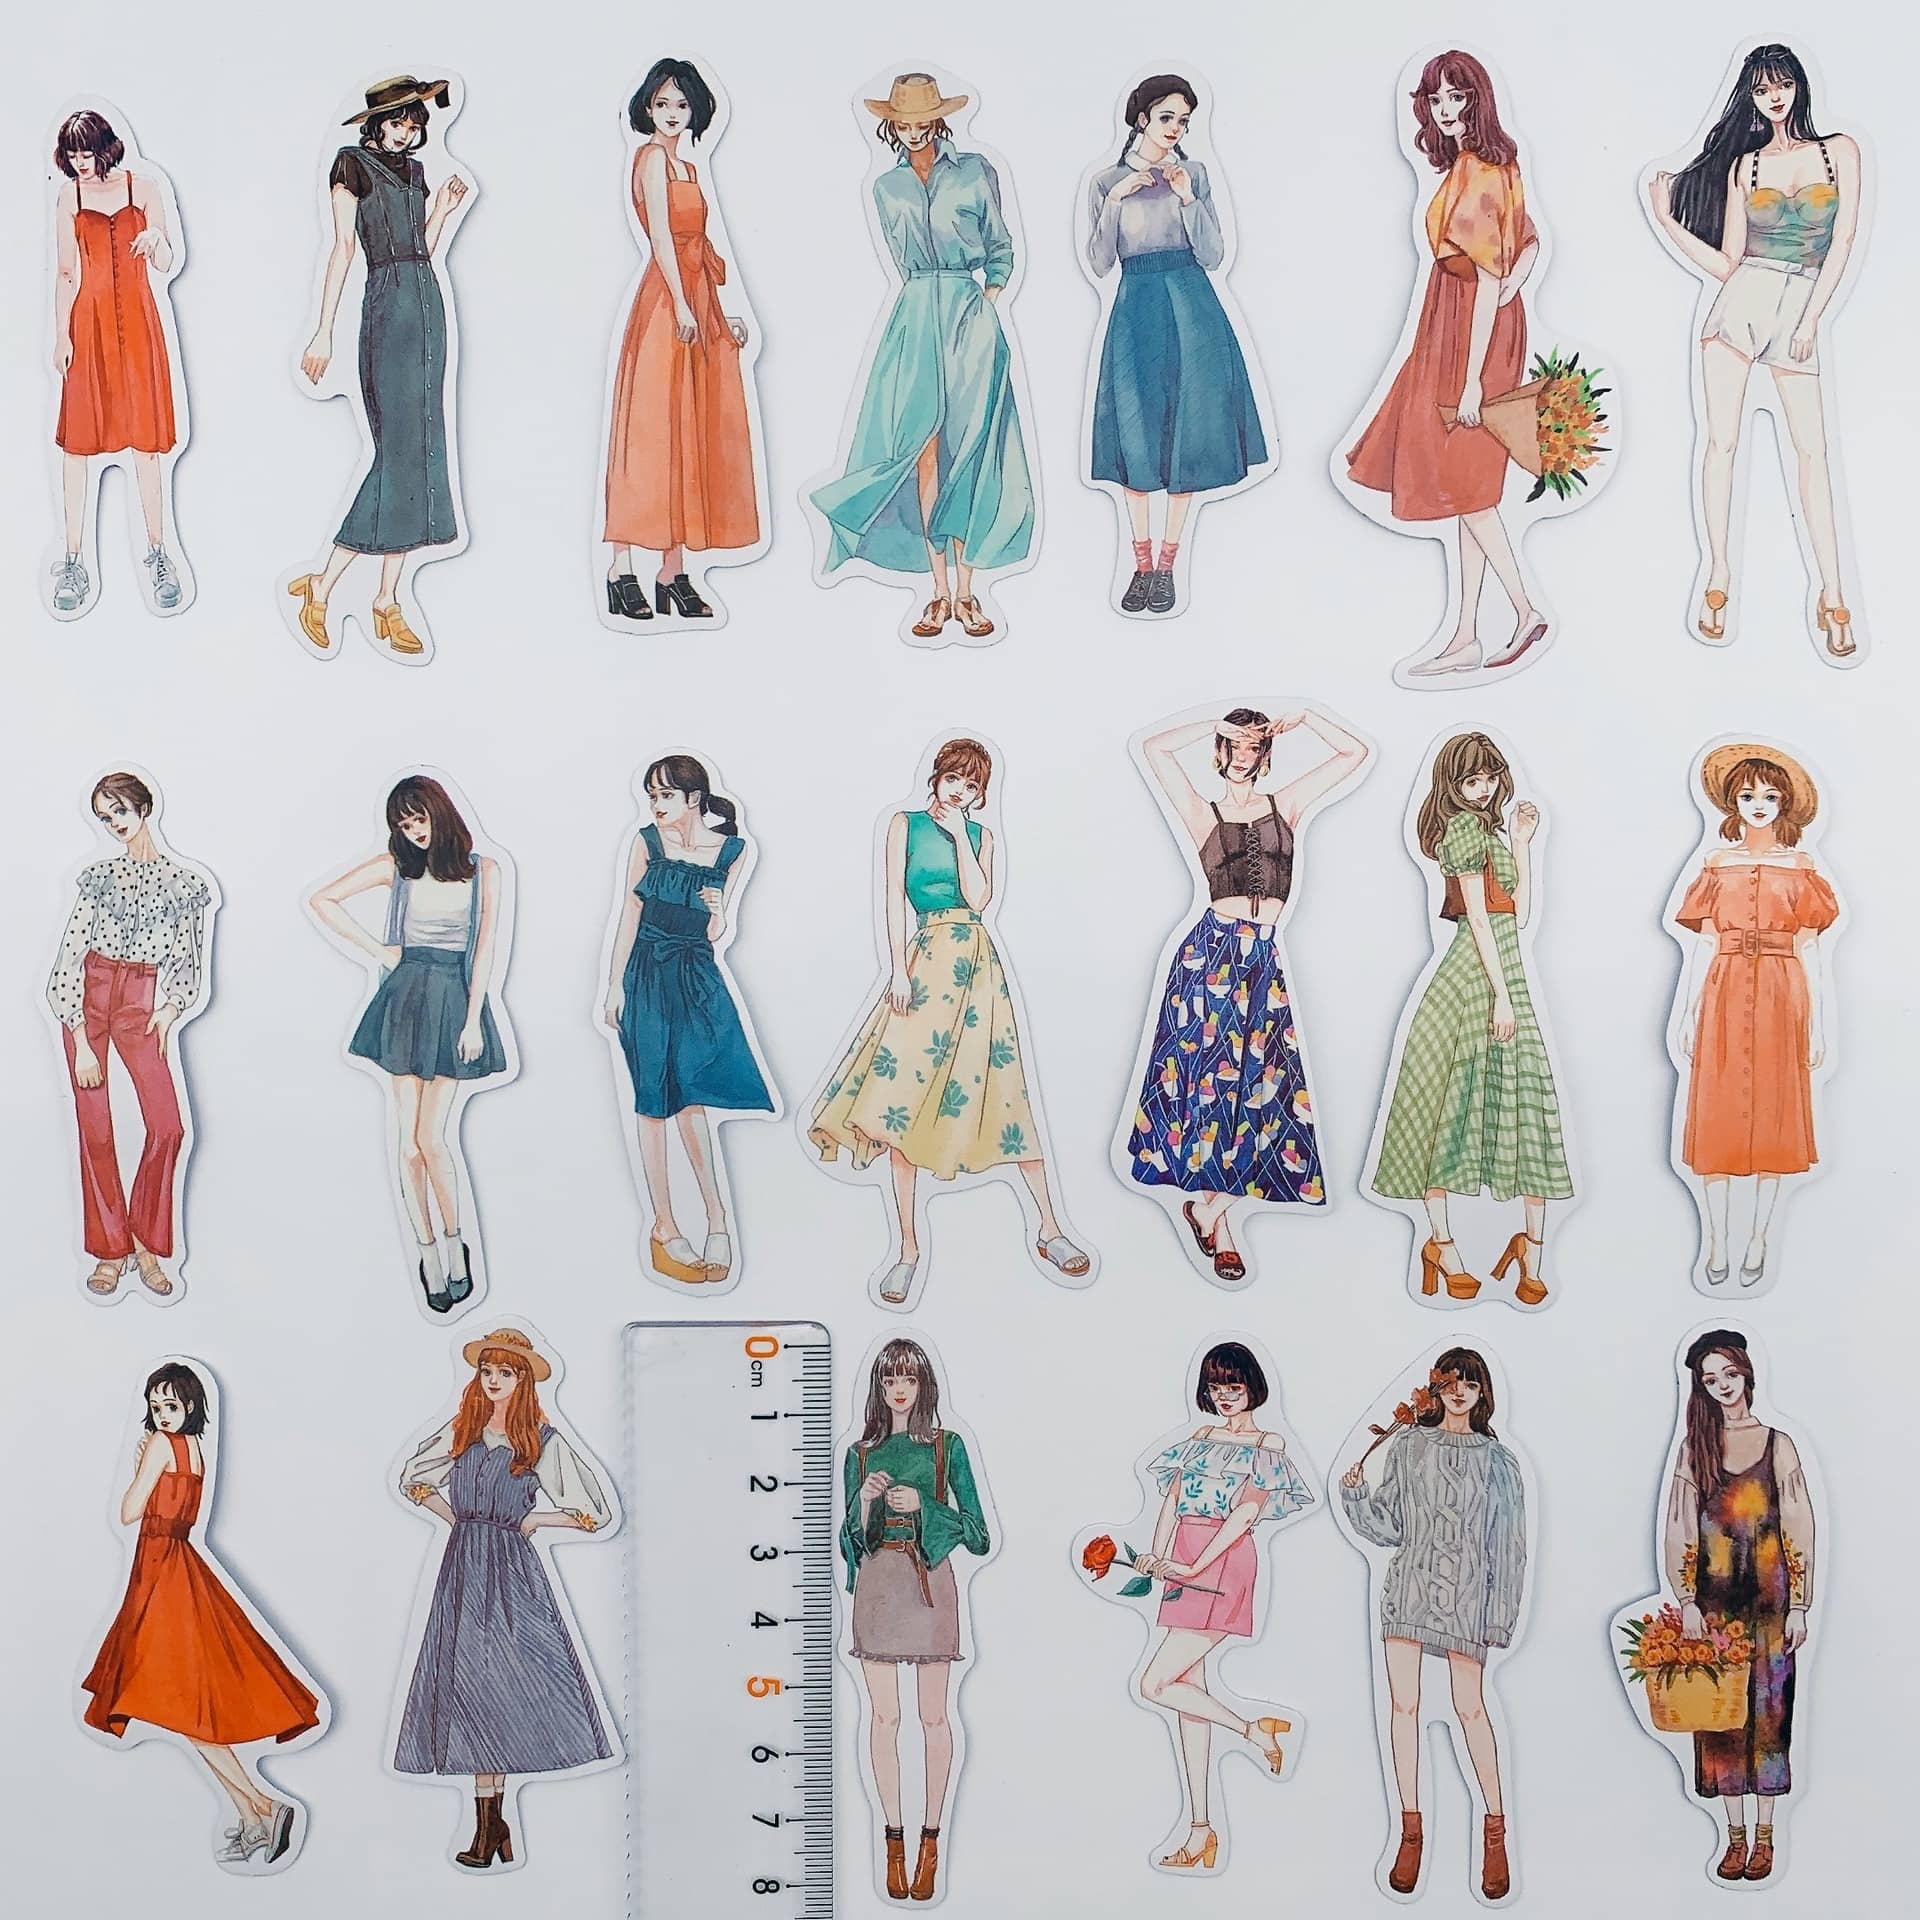 100pcs Fashion Girl Dressing Material Stickers Pack Scrapbooking Junk Journal Cute korean Stationery DIY Deco Stickers